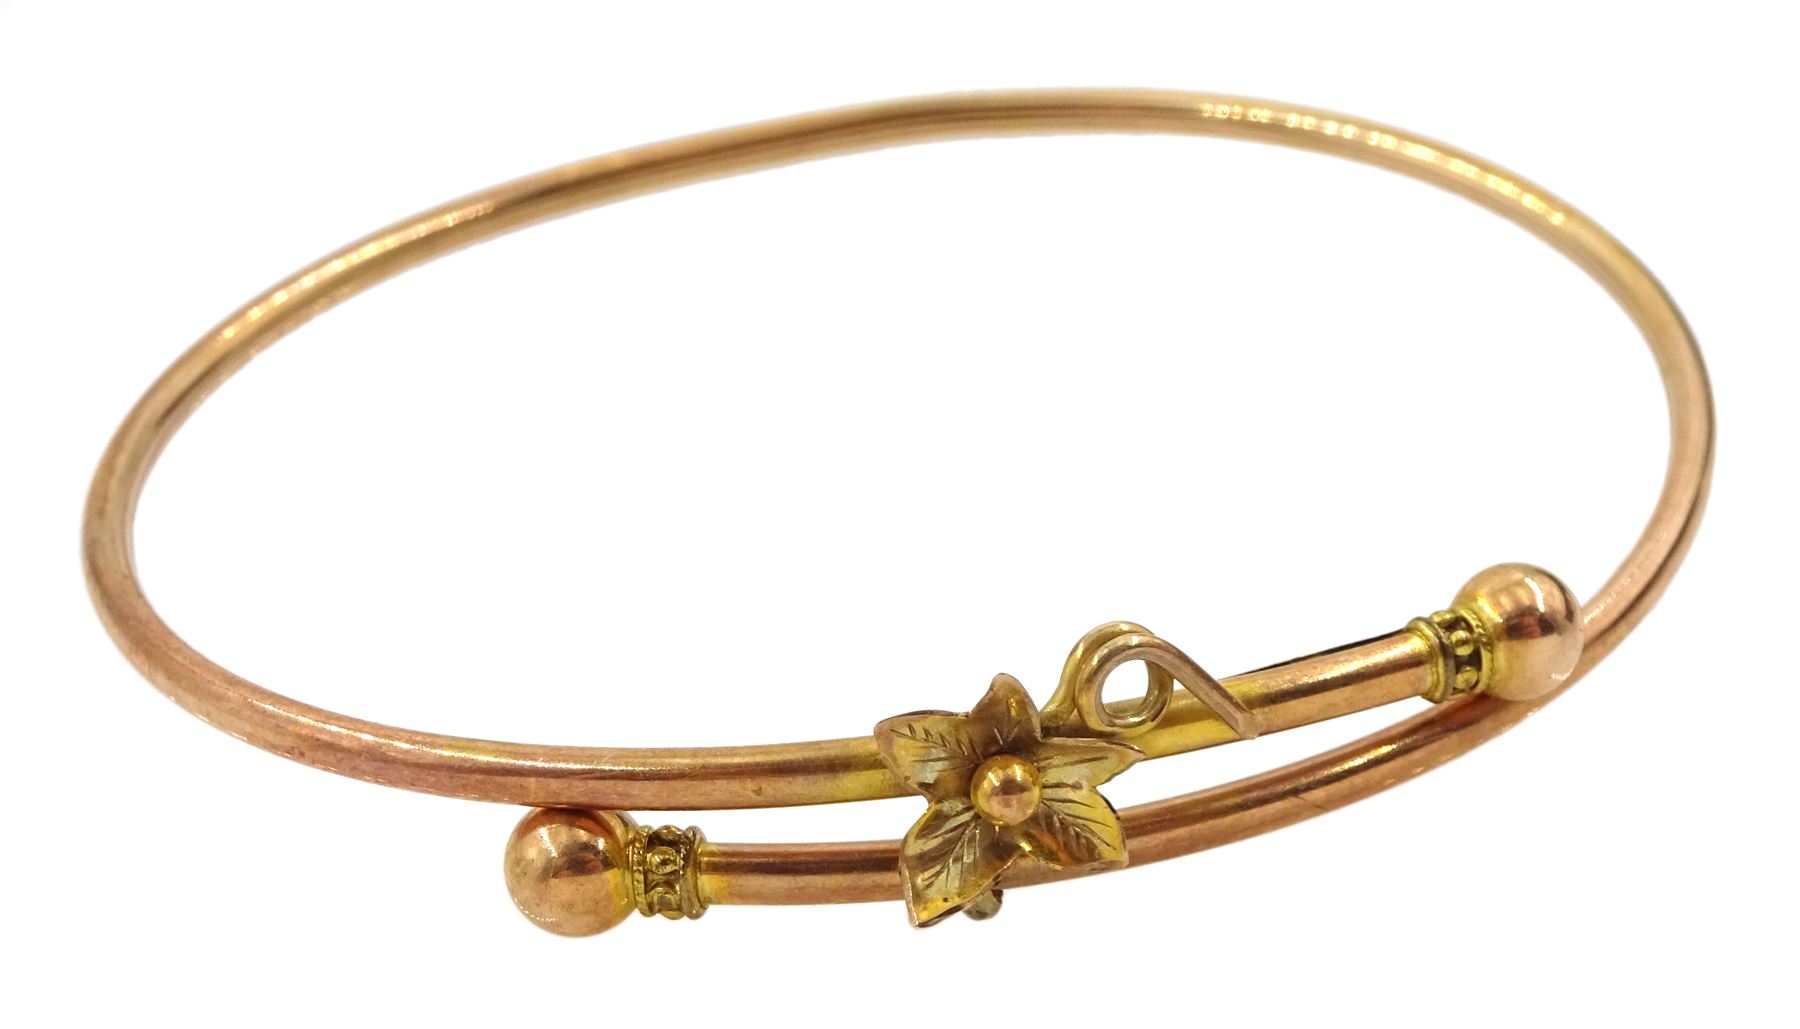 Early 20th century rose gold bangle with leaf decoration